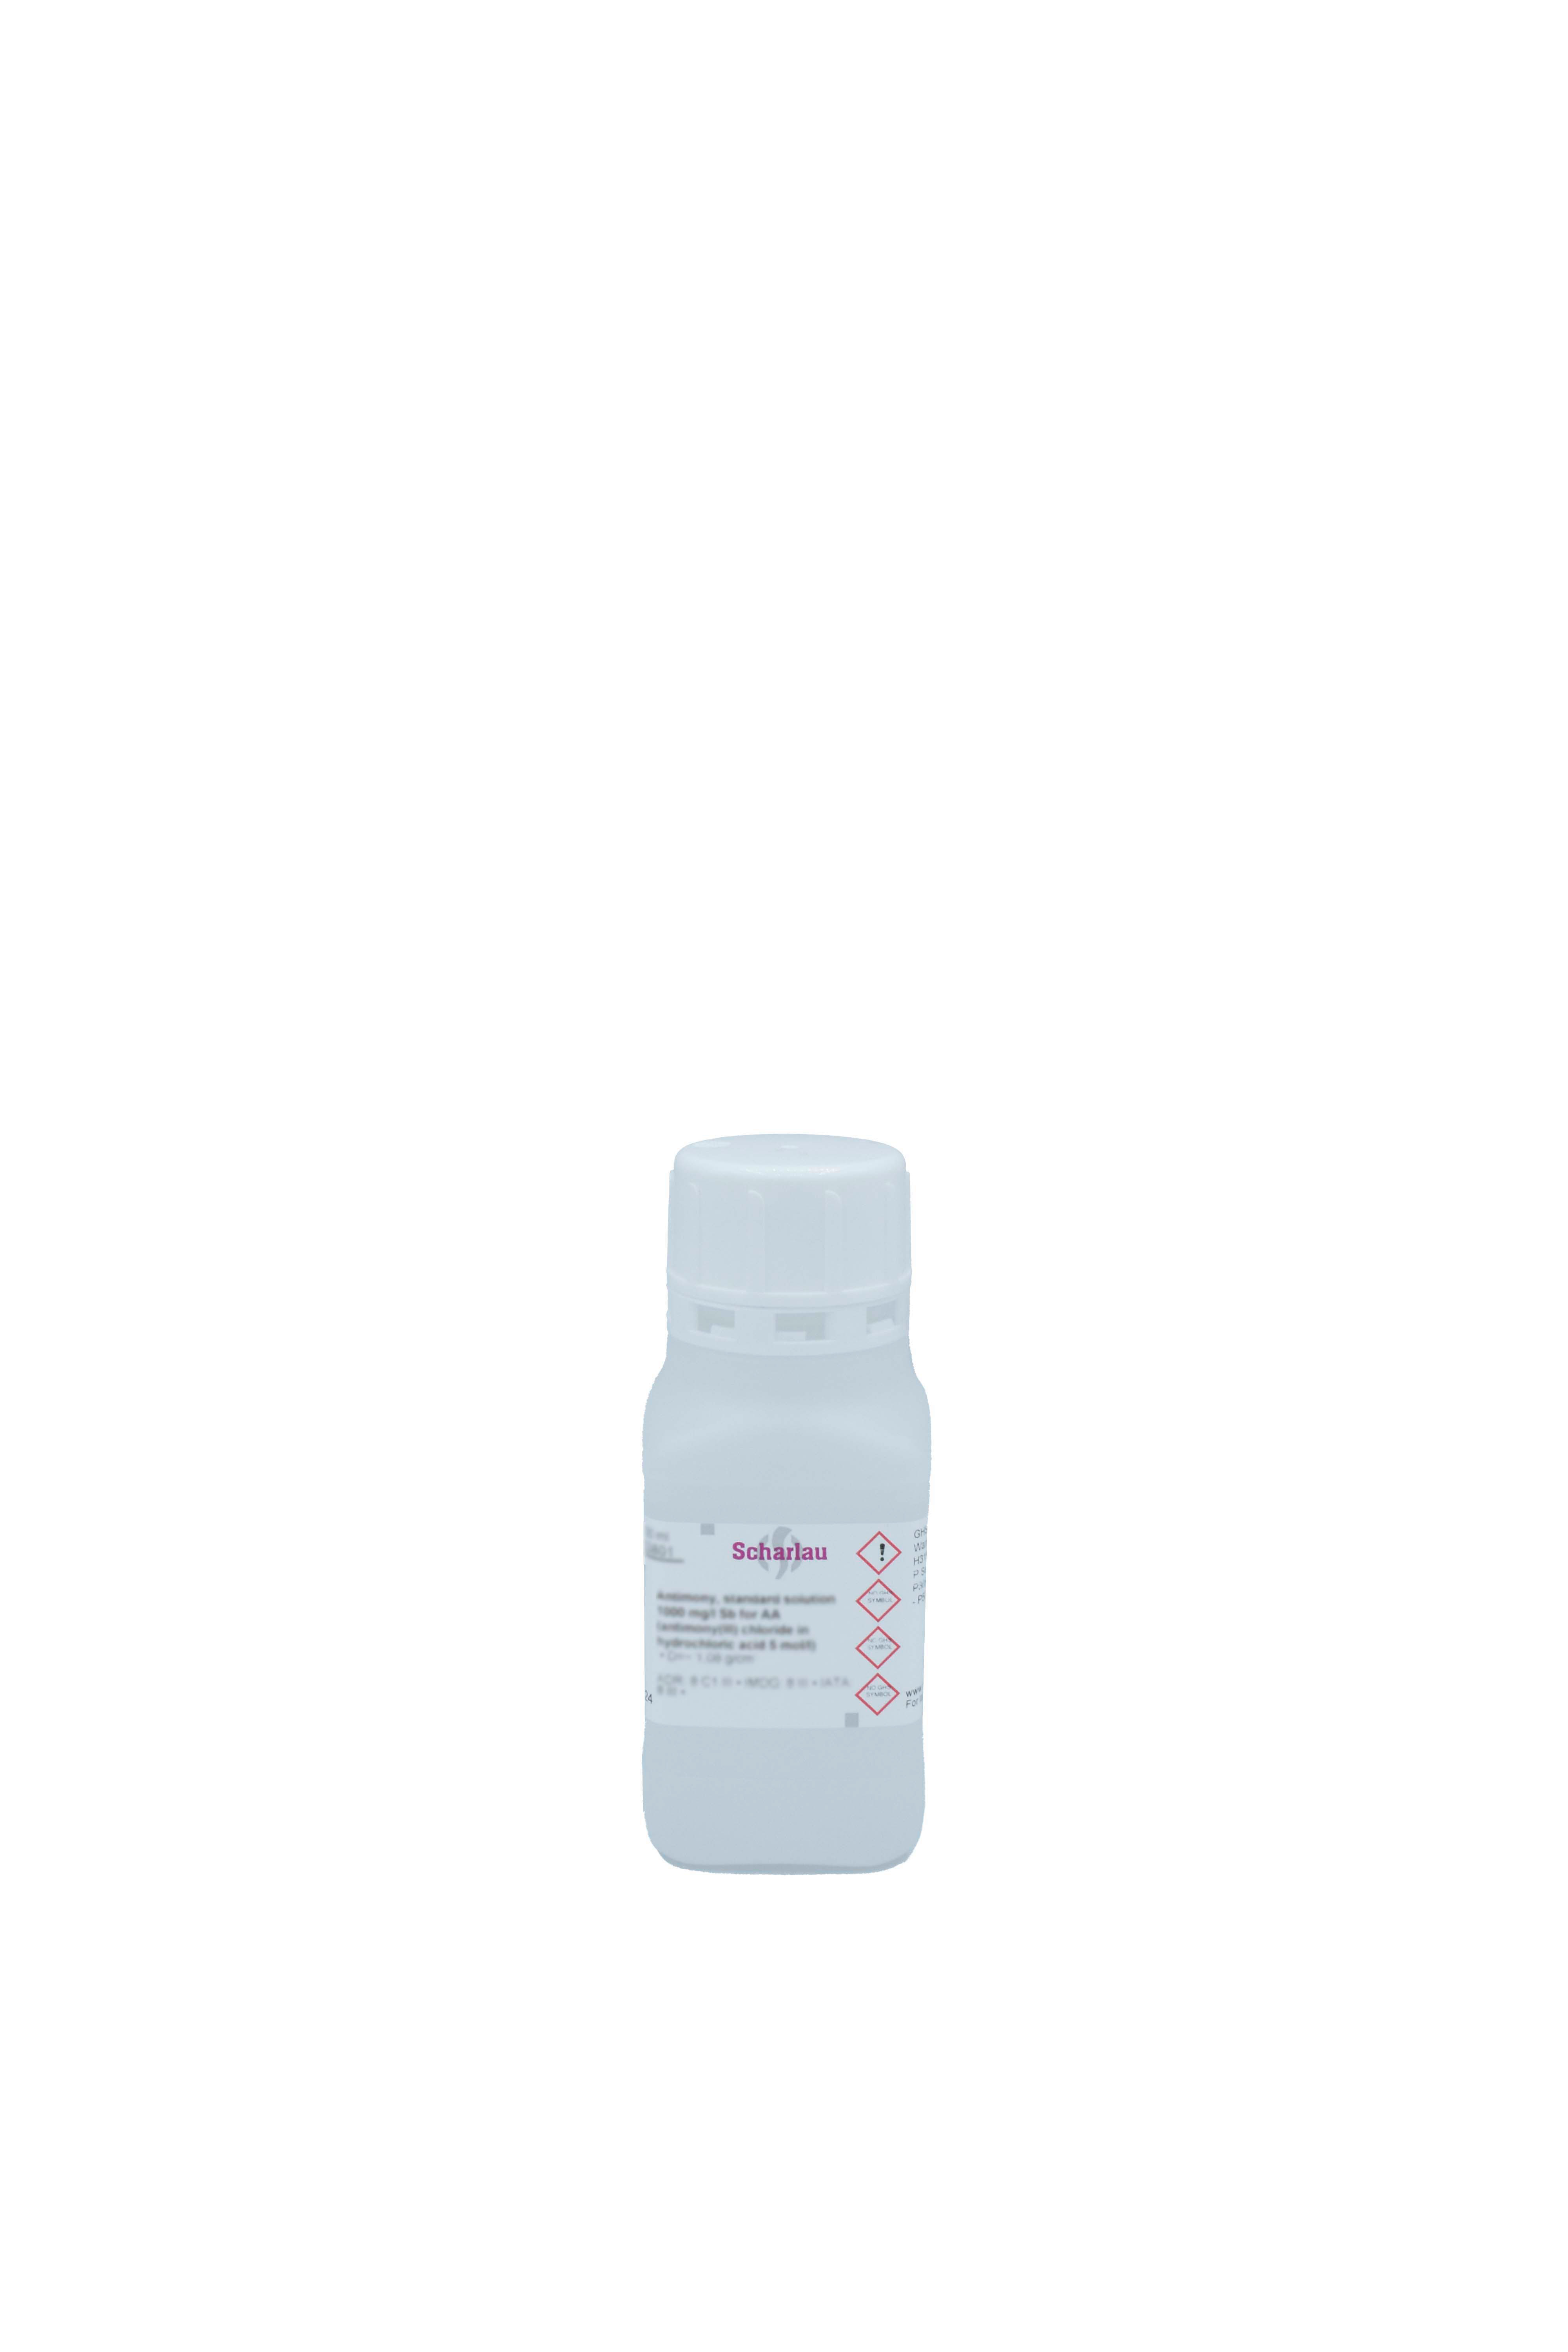 Silver, standard solution 1000 mg/l Ag for AAsS (silver nitrate in HNO3 0,5 mol/l)